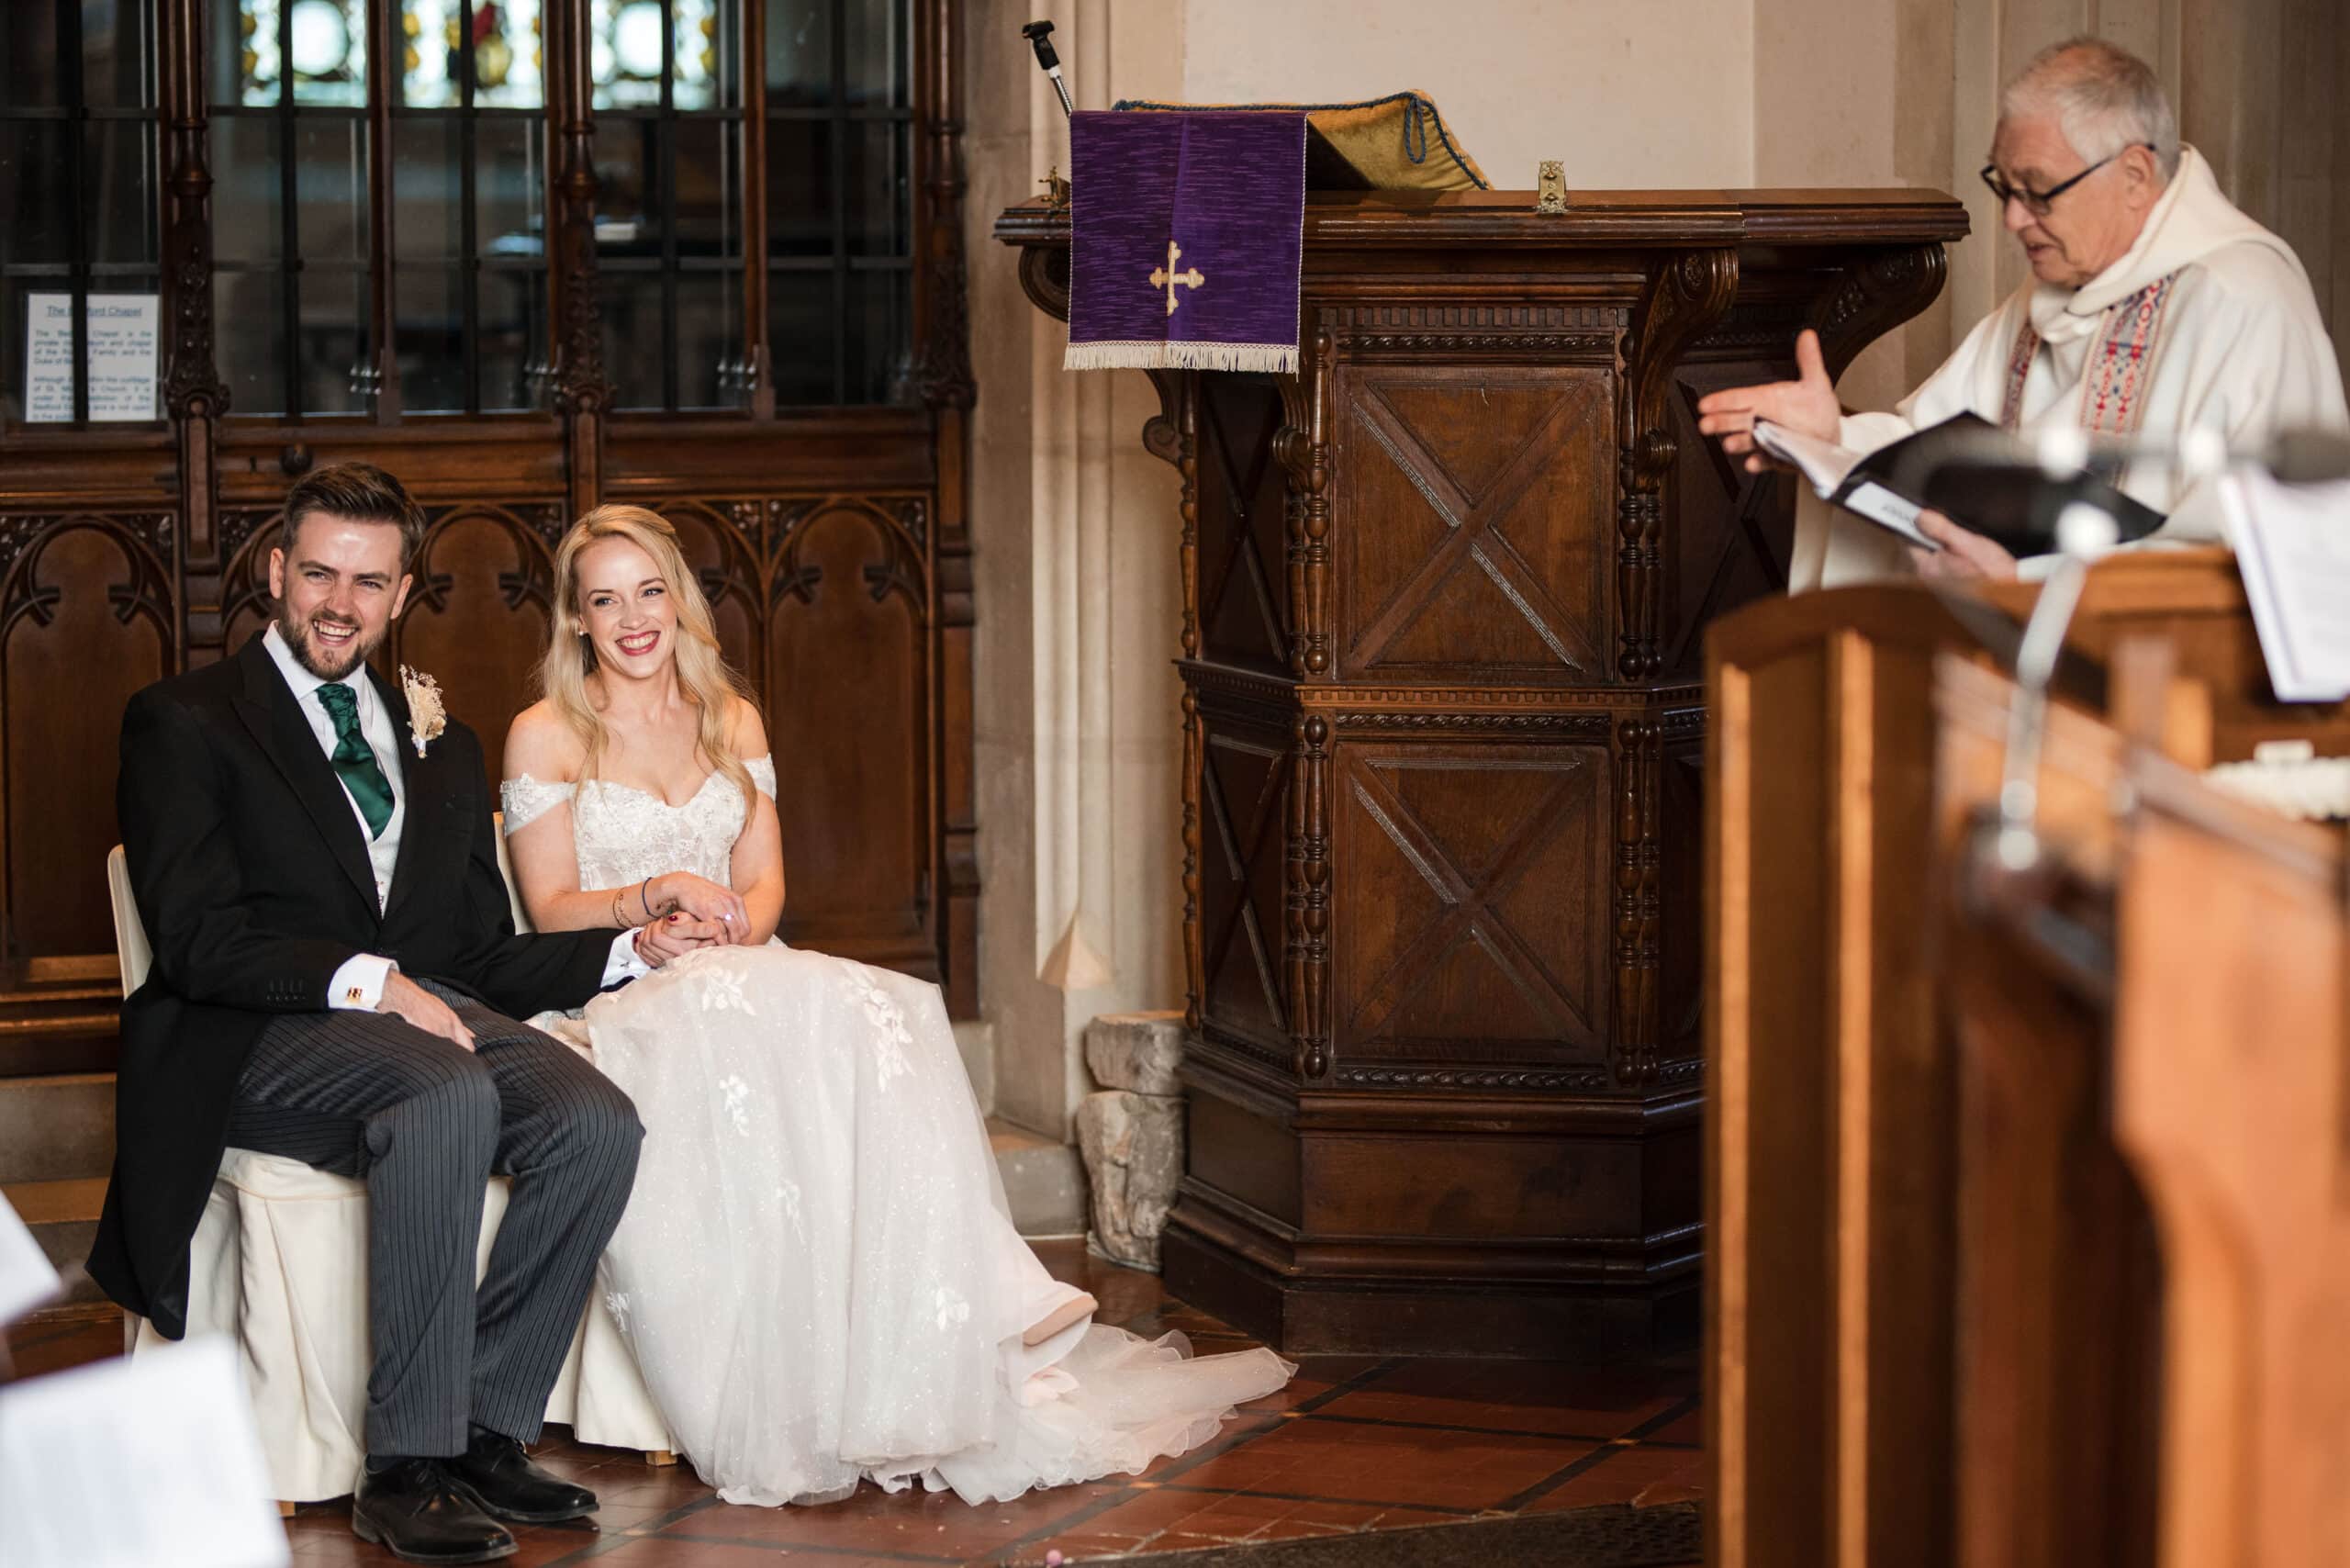 Vicar talking to couple getting married